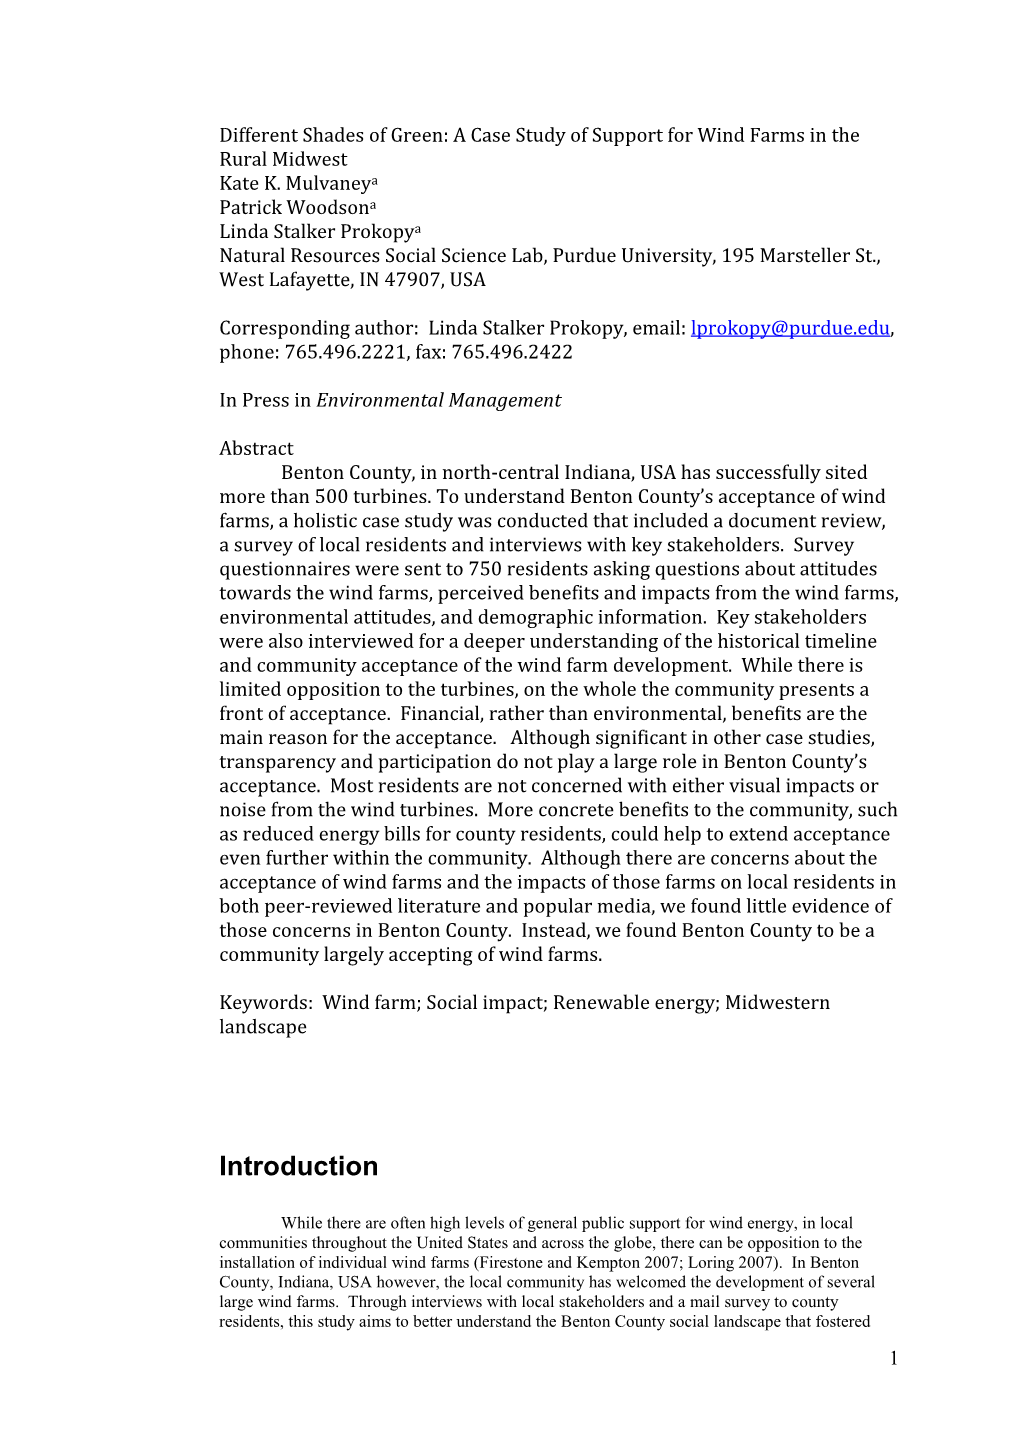 A Case Study of Support for Wind Farms in the Rural Midwest Kate K